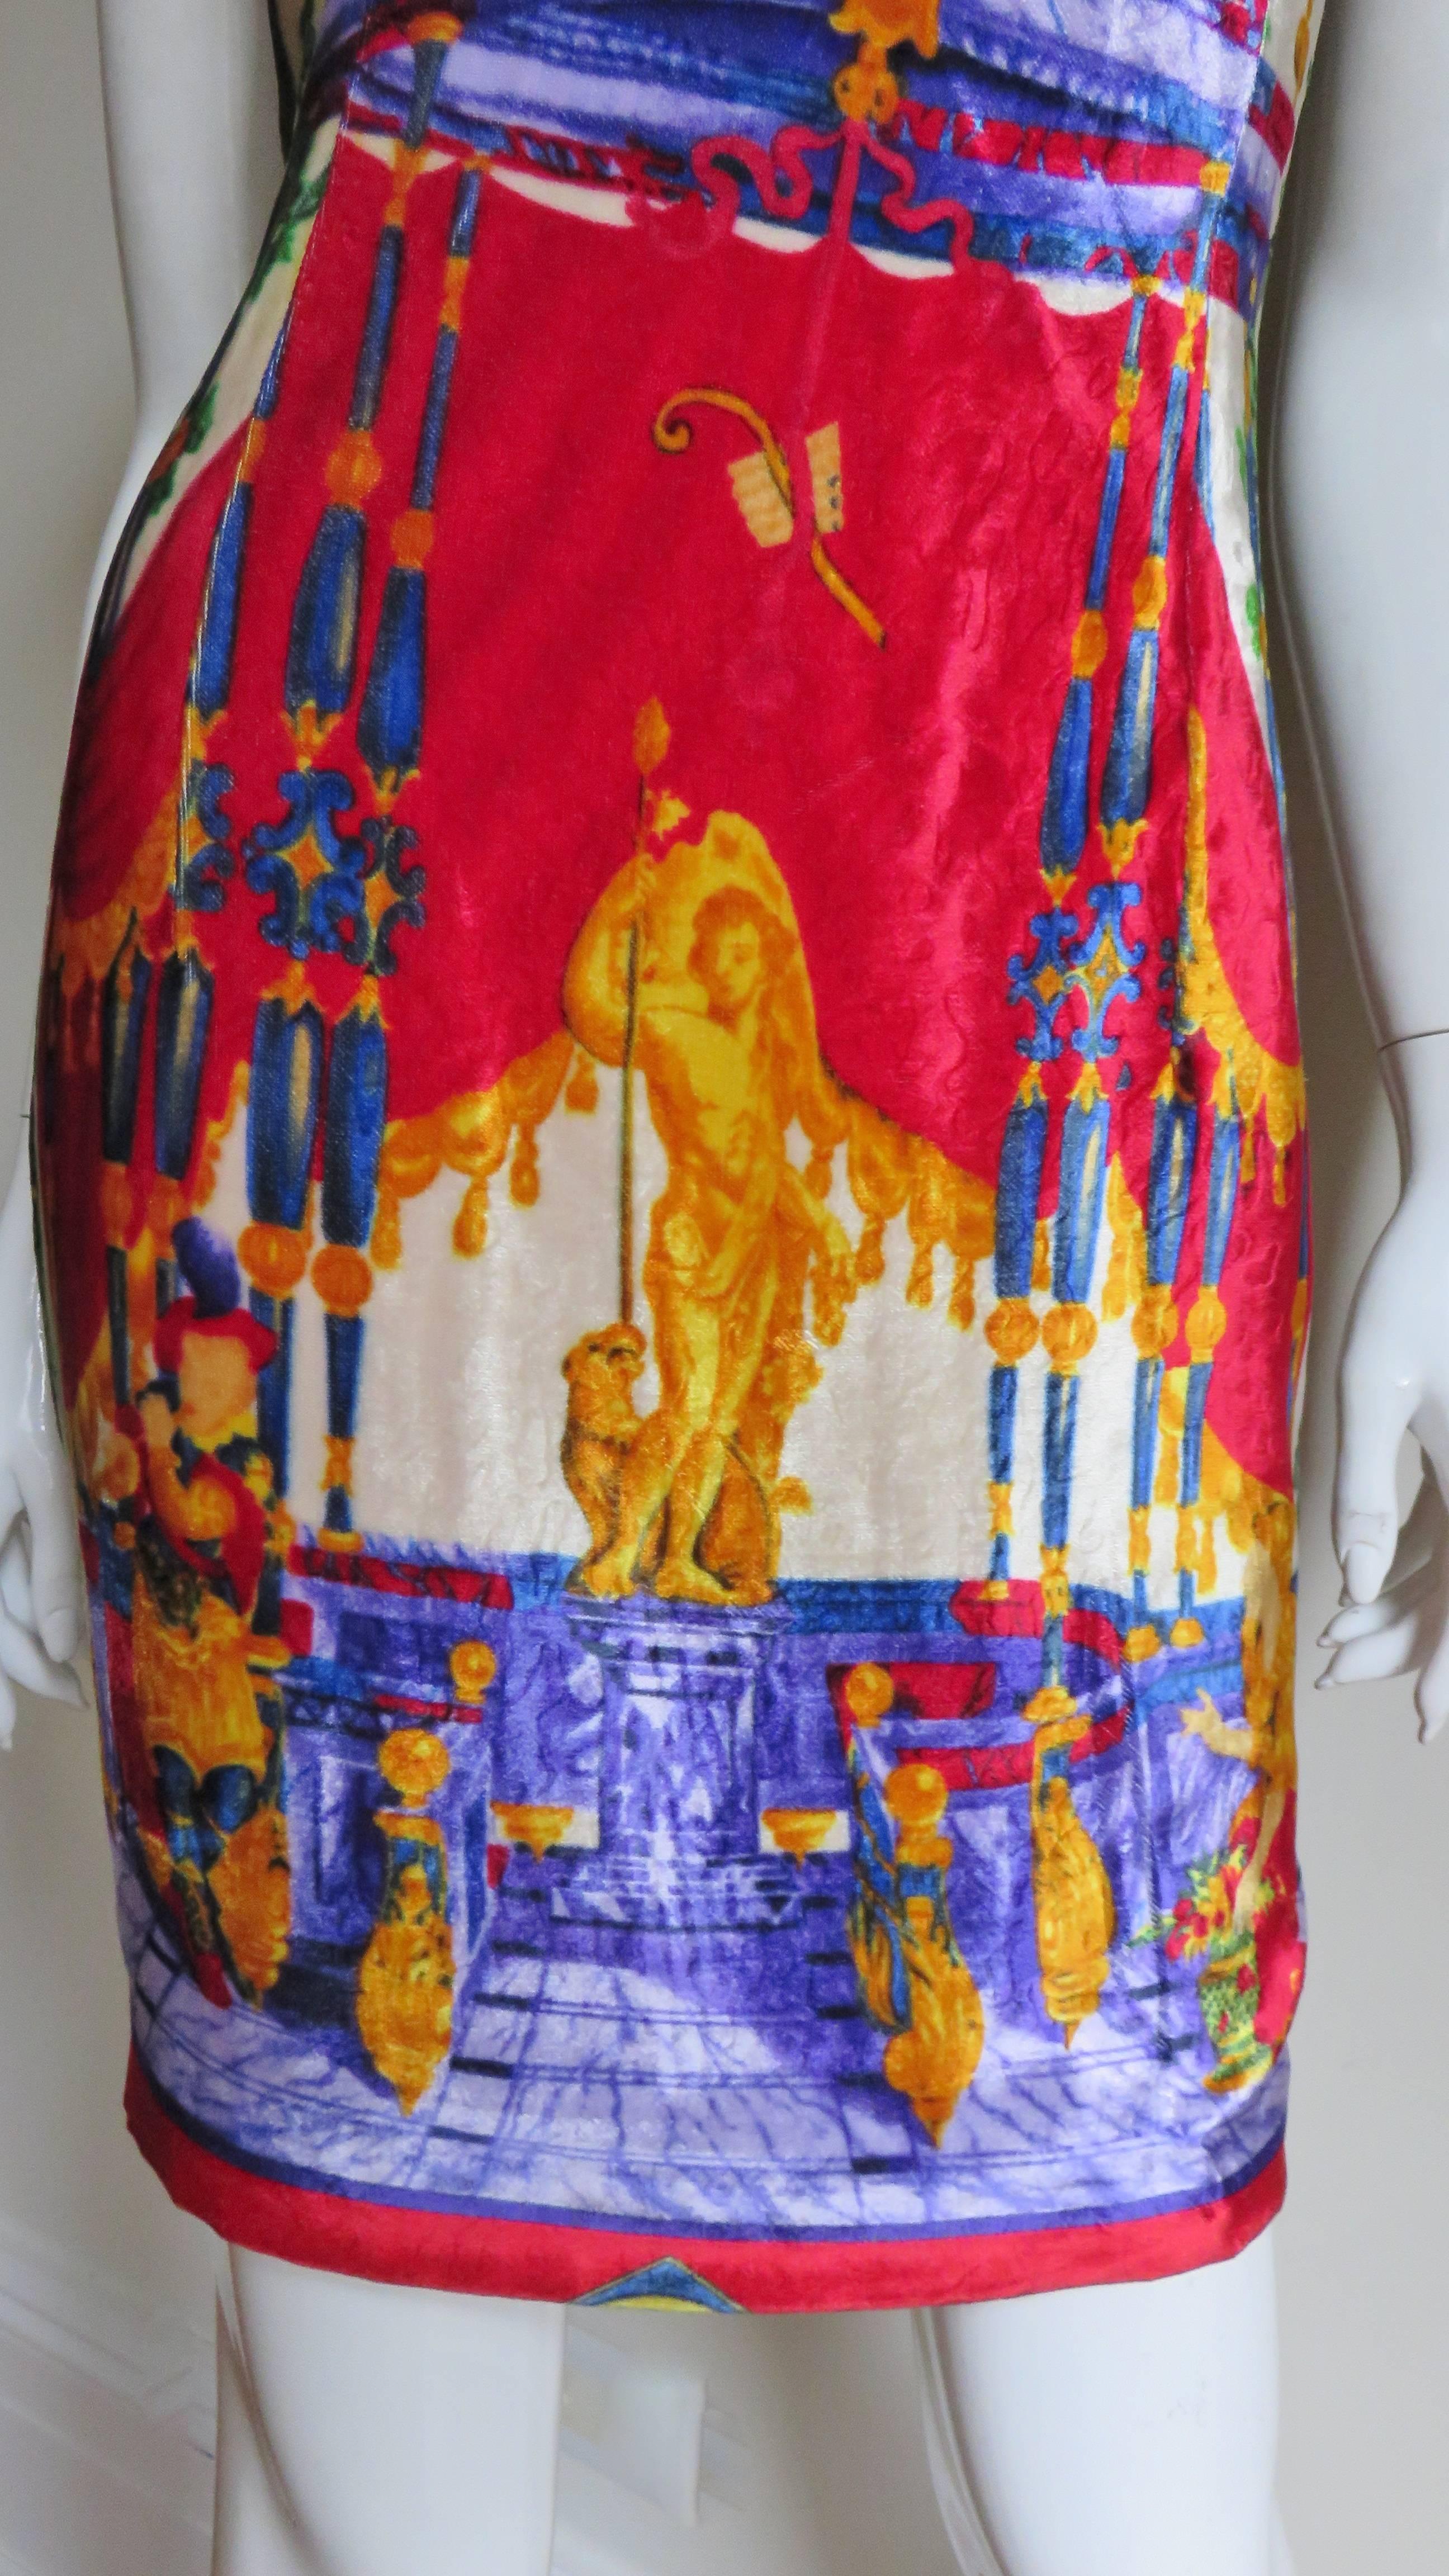 Gianni Versace New Silk Strapless Dress 1990s In Good Condition For Sale In Water Mill, NY